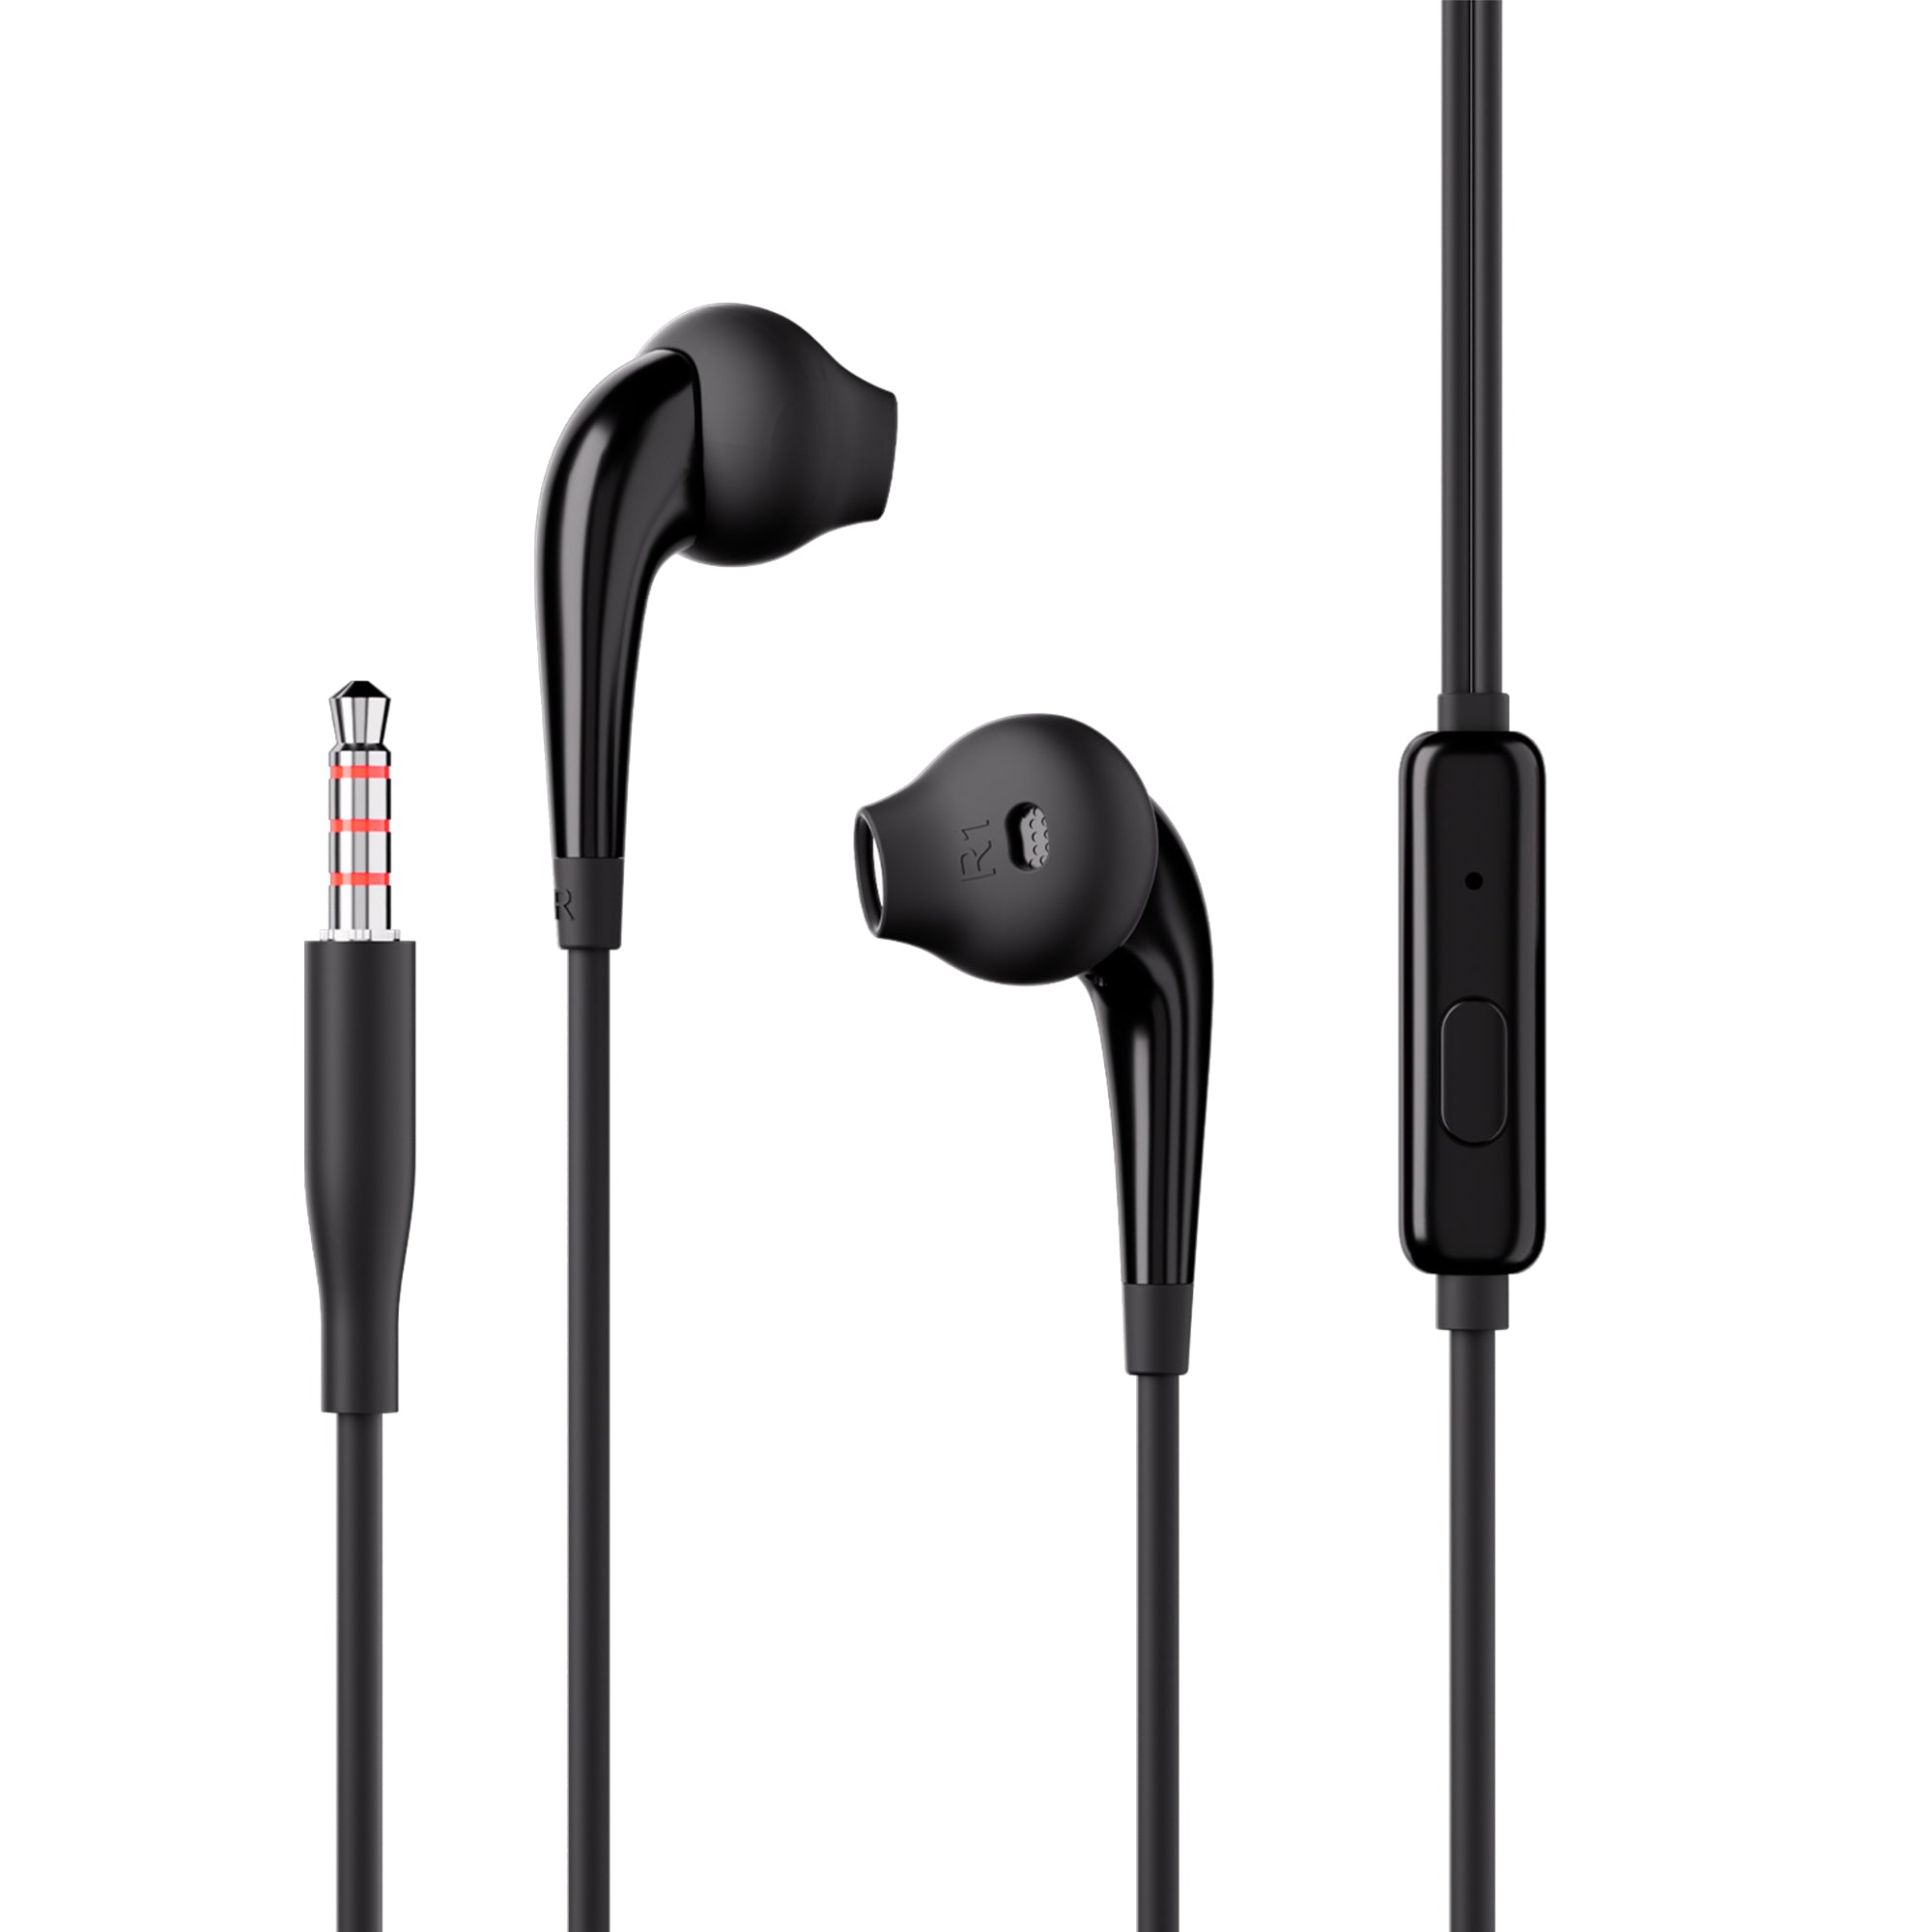 Gizmore ME345 In-Ear Wired Earphone with Hi-Fi Stereo Sound, Extra Deep Bass, Tangle Free Cable and Single Button Control